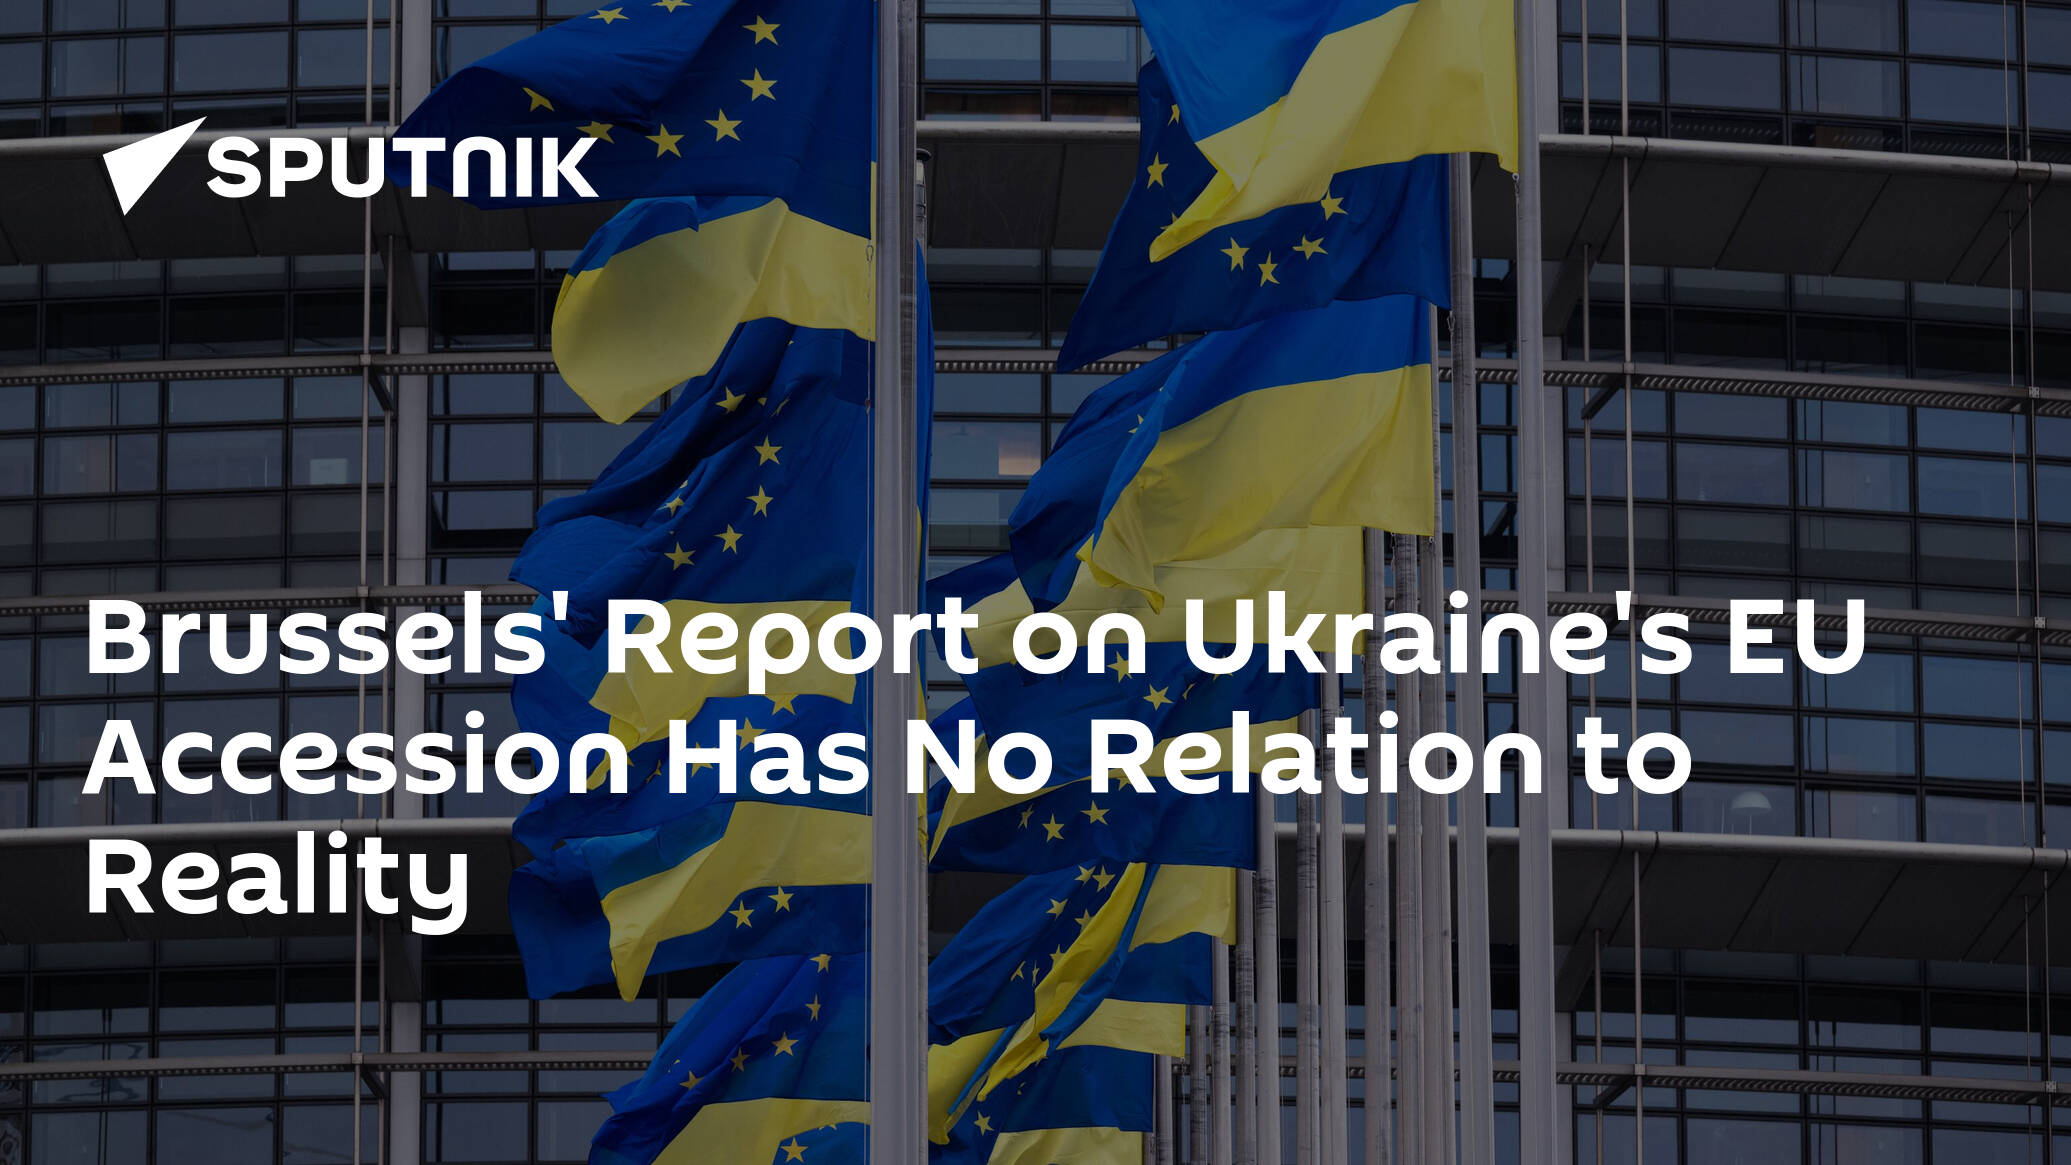 Brussels' Report on Ukraine's EU Accession Has No Relation to Reality